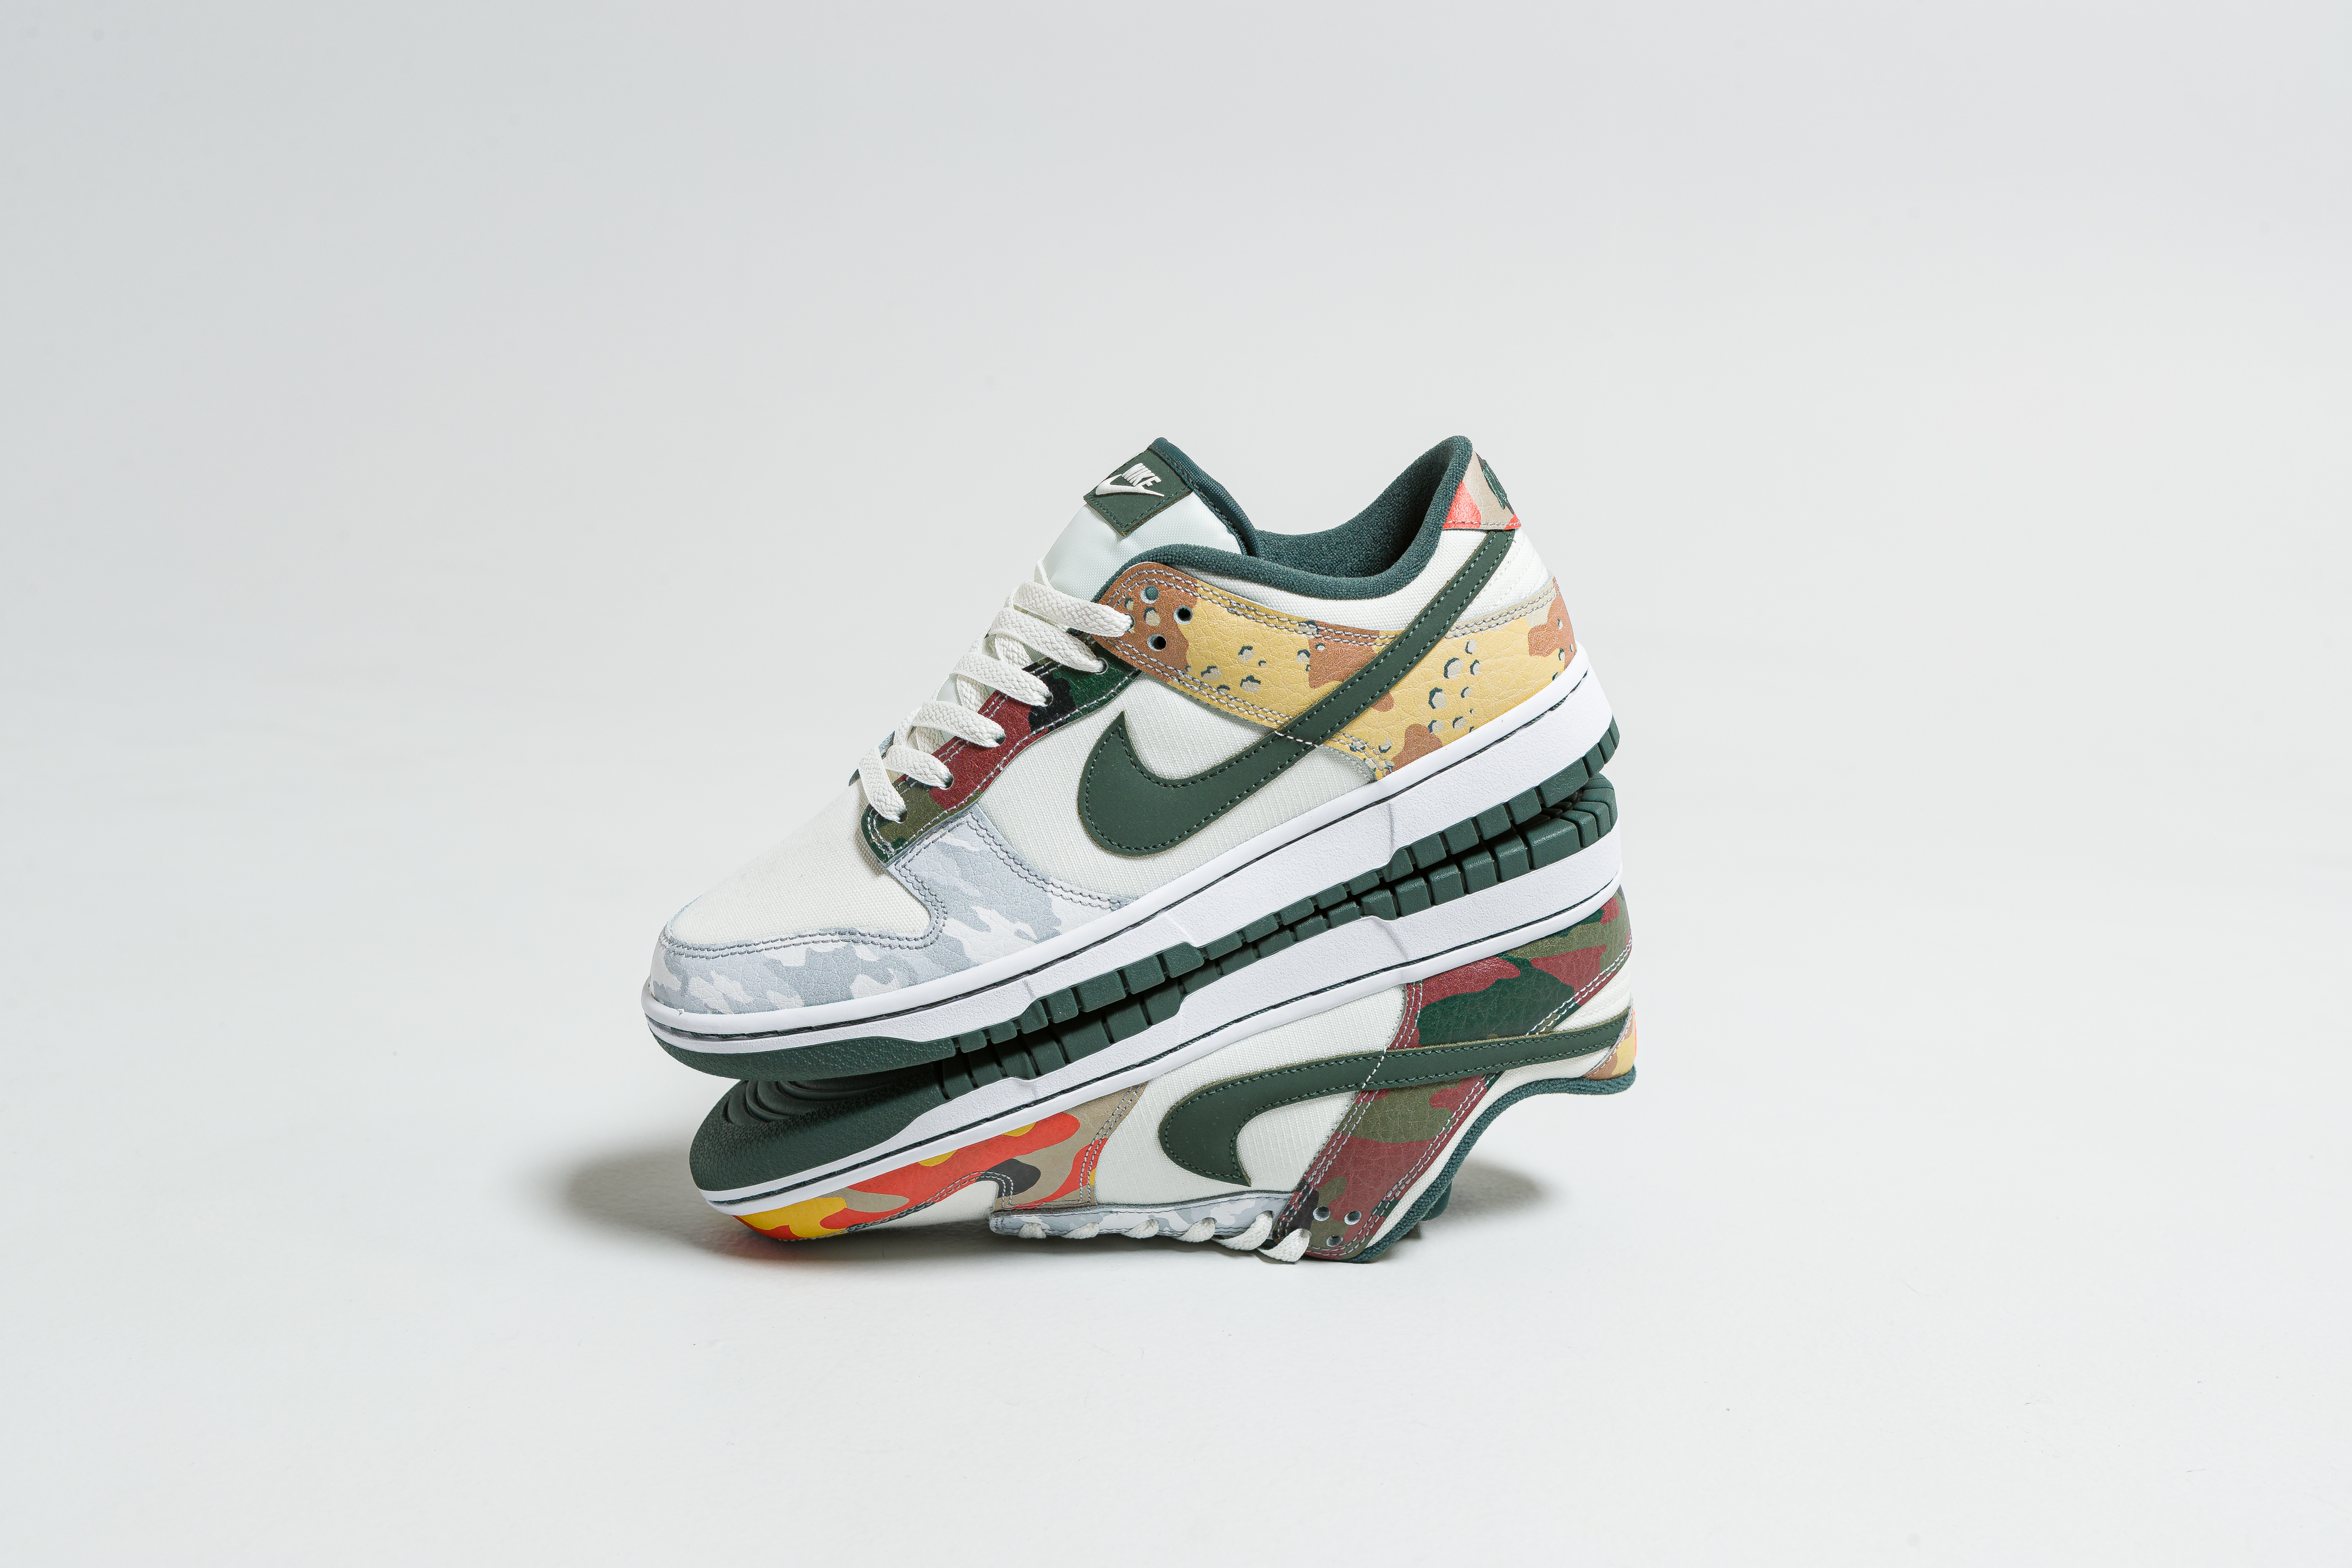 Nike - Dunk Low SE - Sail/Vintage Green - Up There